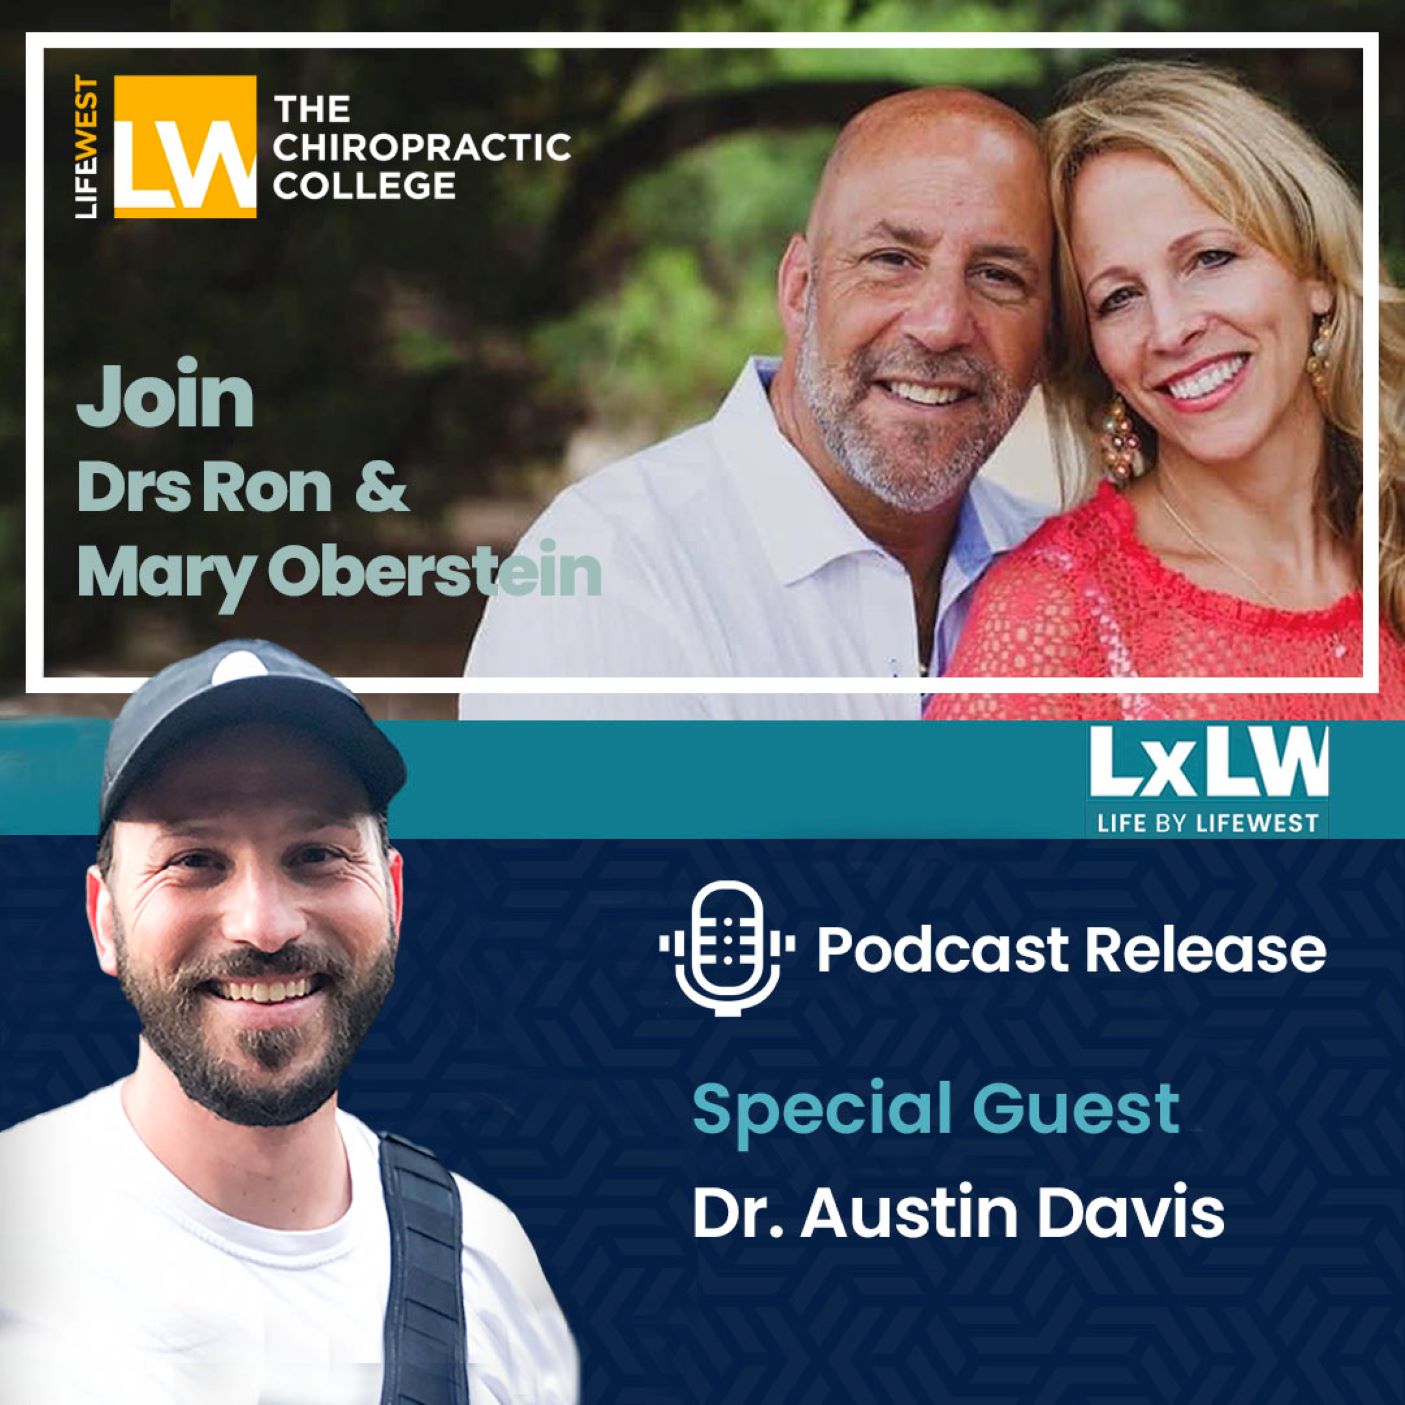 S2 Ep6 Your Service Hand and Business Hand Need to Remain Separate with Dr. Austin Davis